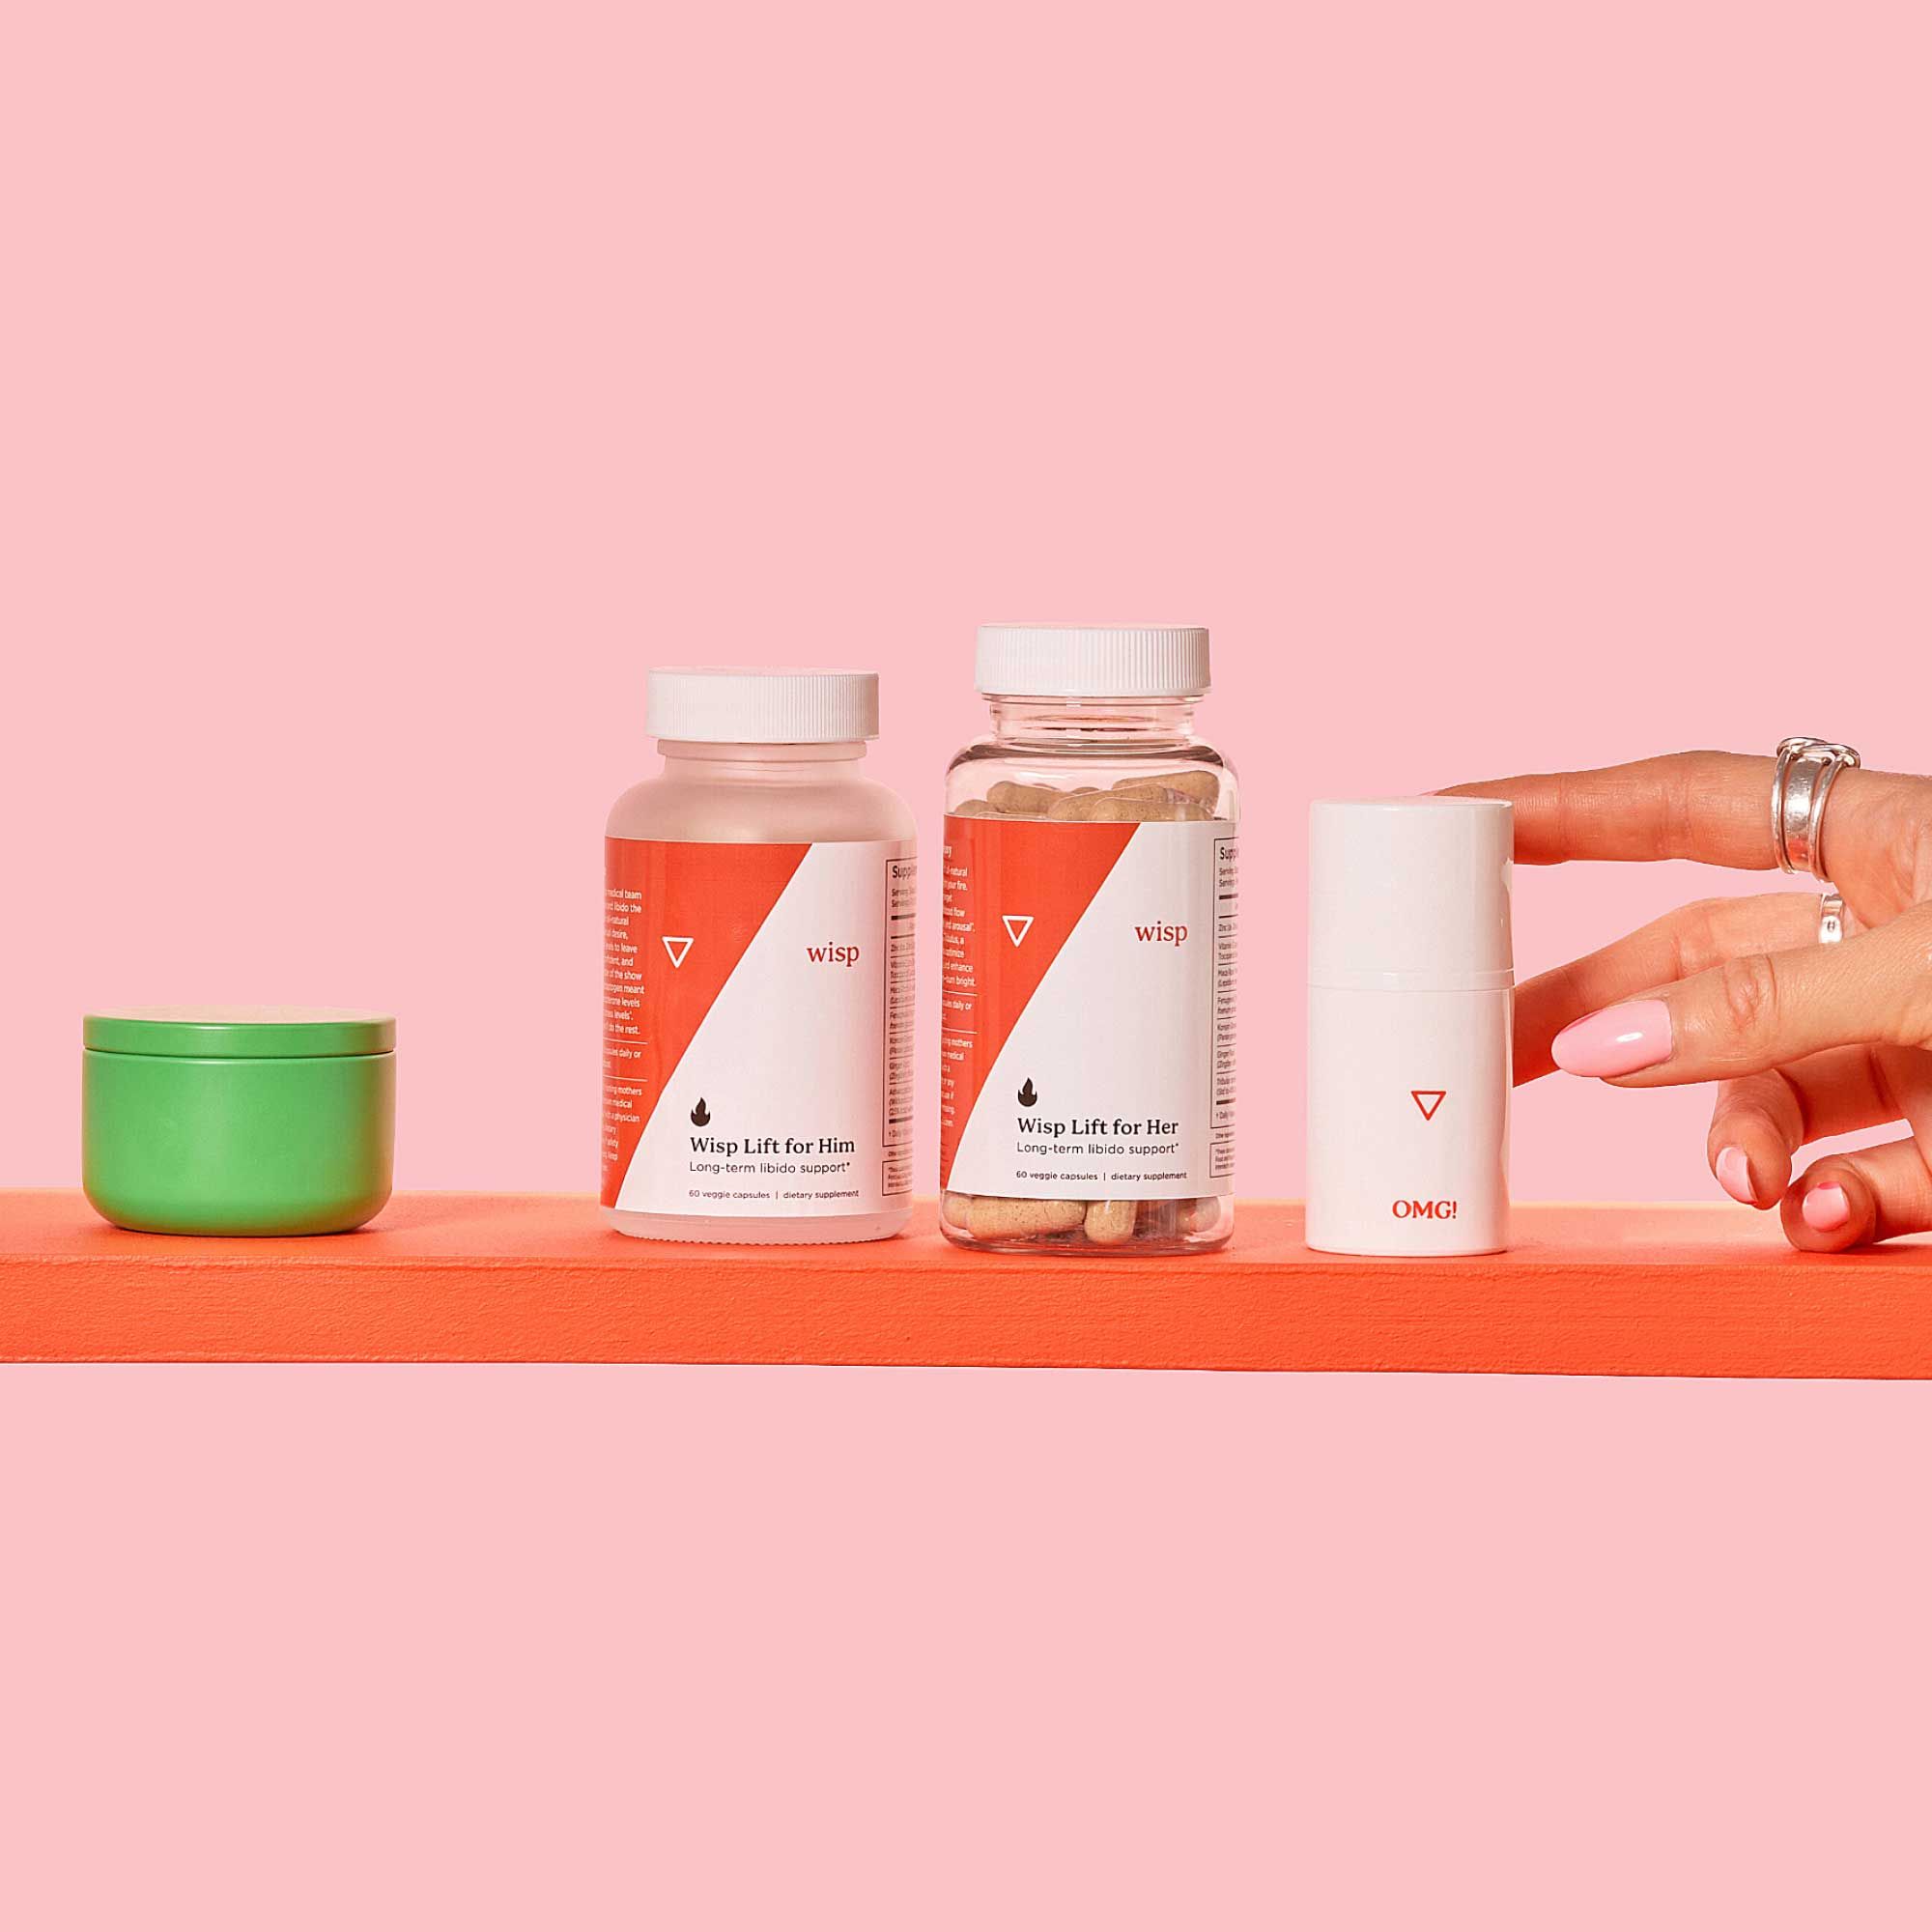 A woman's hand reaching for OMG Cream next to bottles of Wisp Lift for Her and Wisp Lift for Him on a red shelf with a pink background